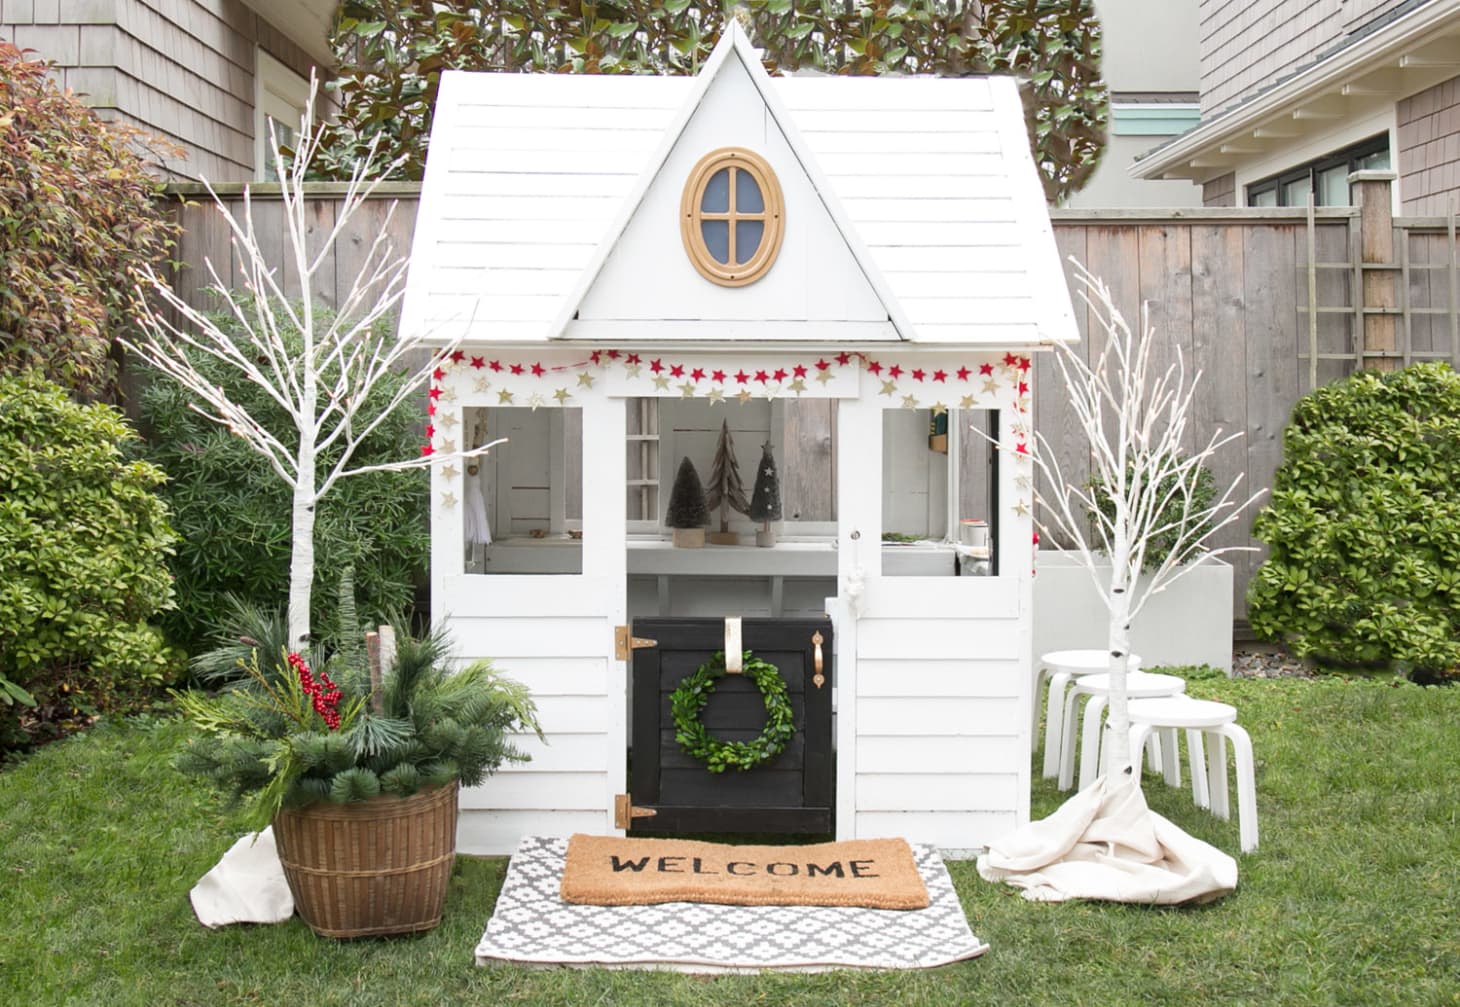 Costco Playhouse Customized For Christmas Makeover Apartment Therapy